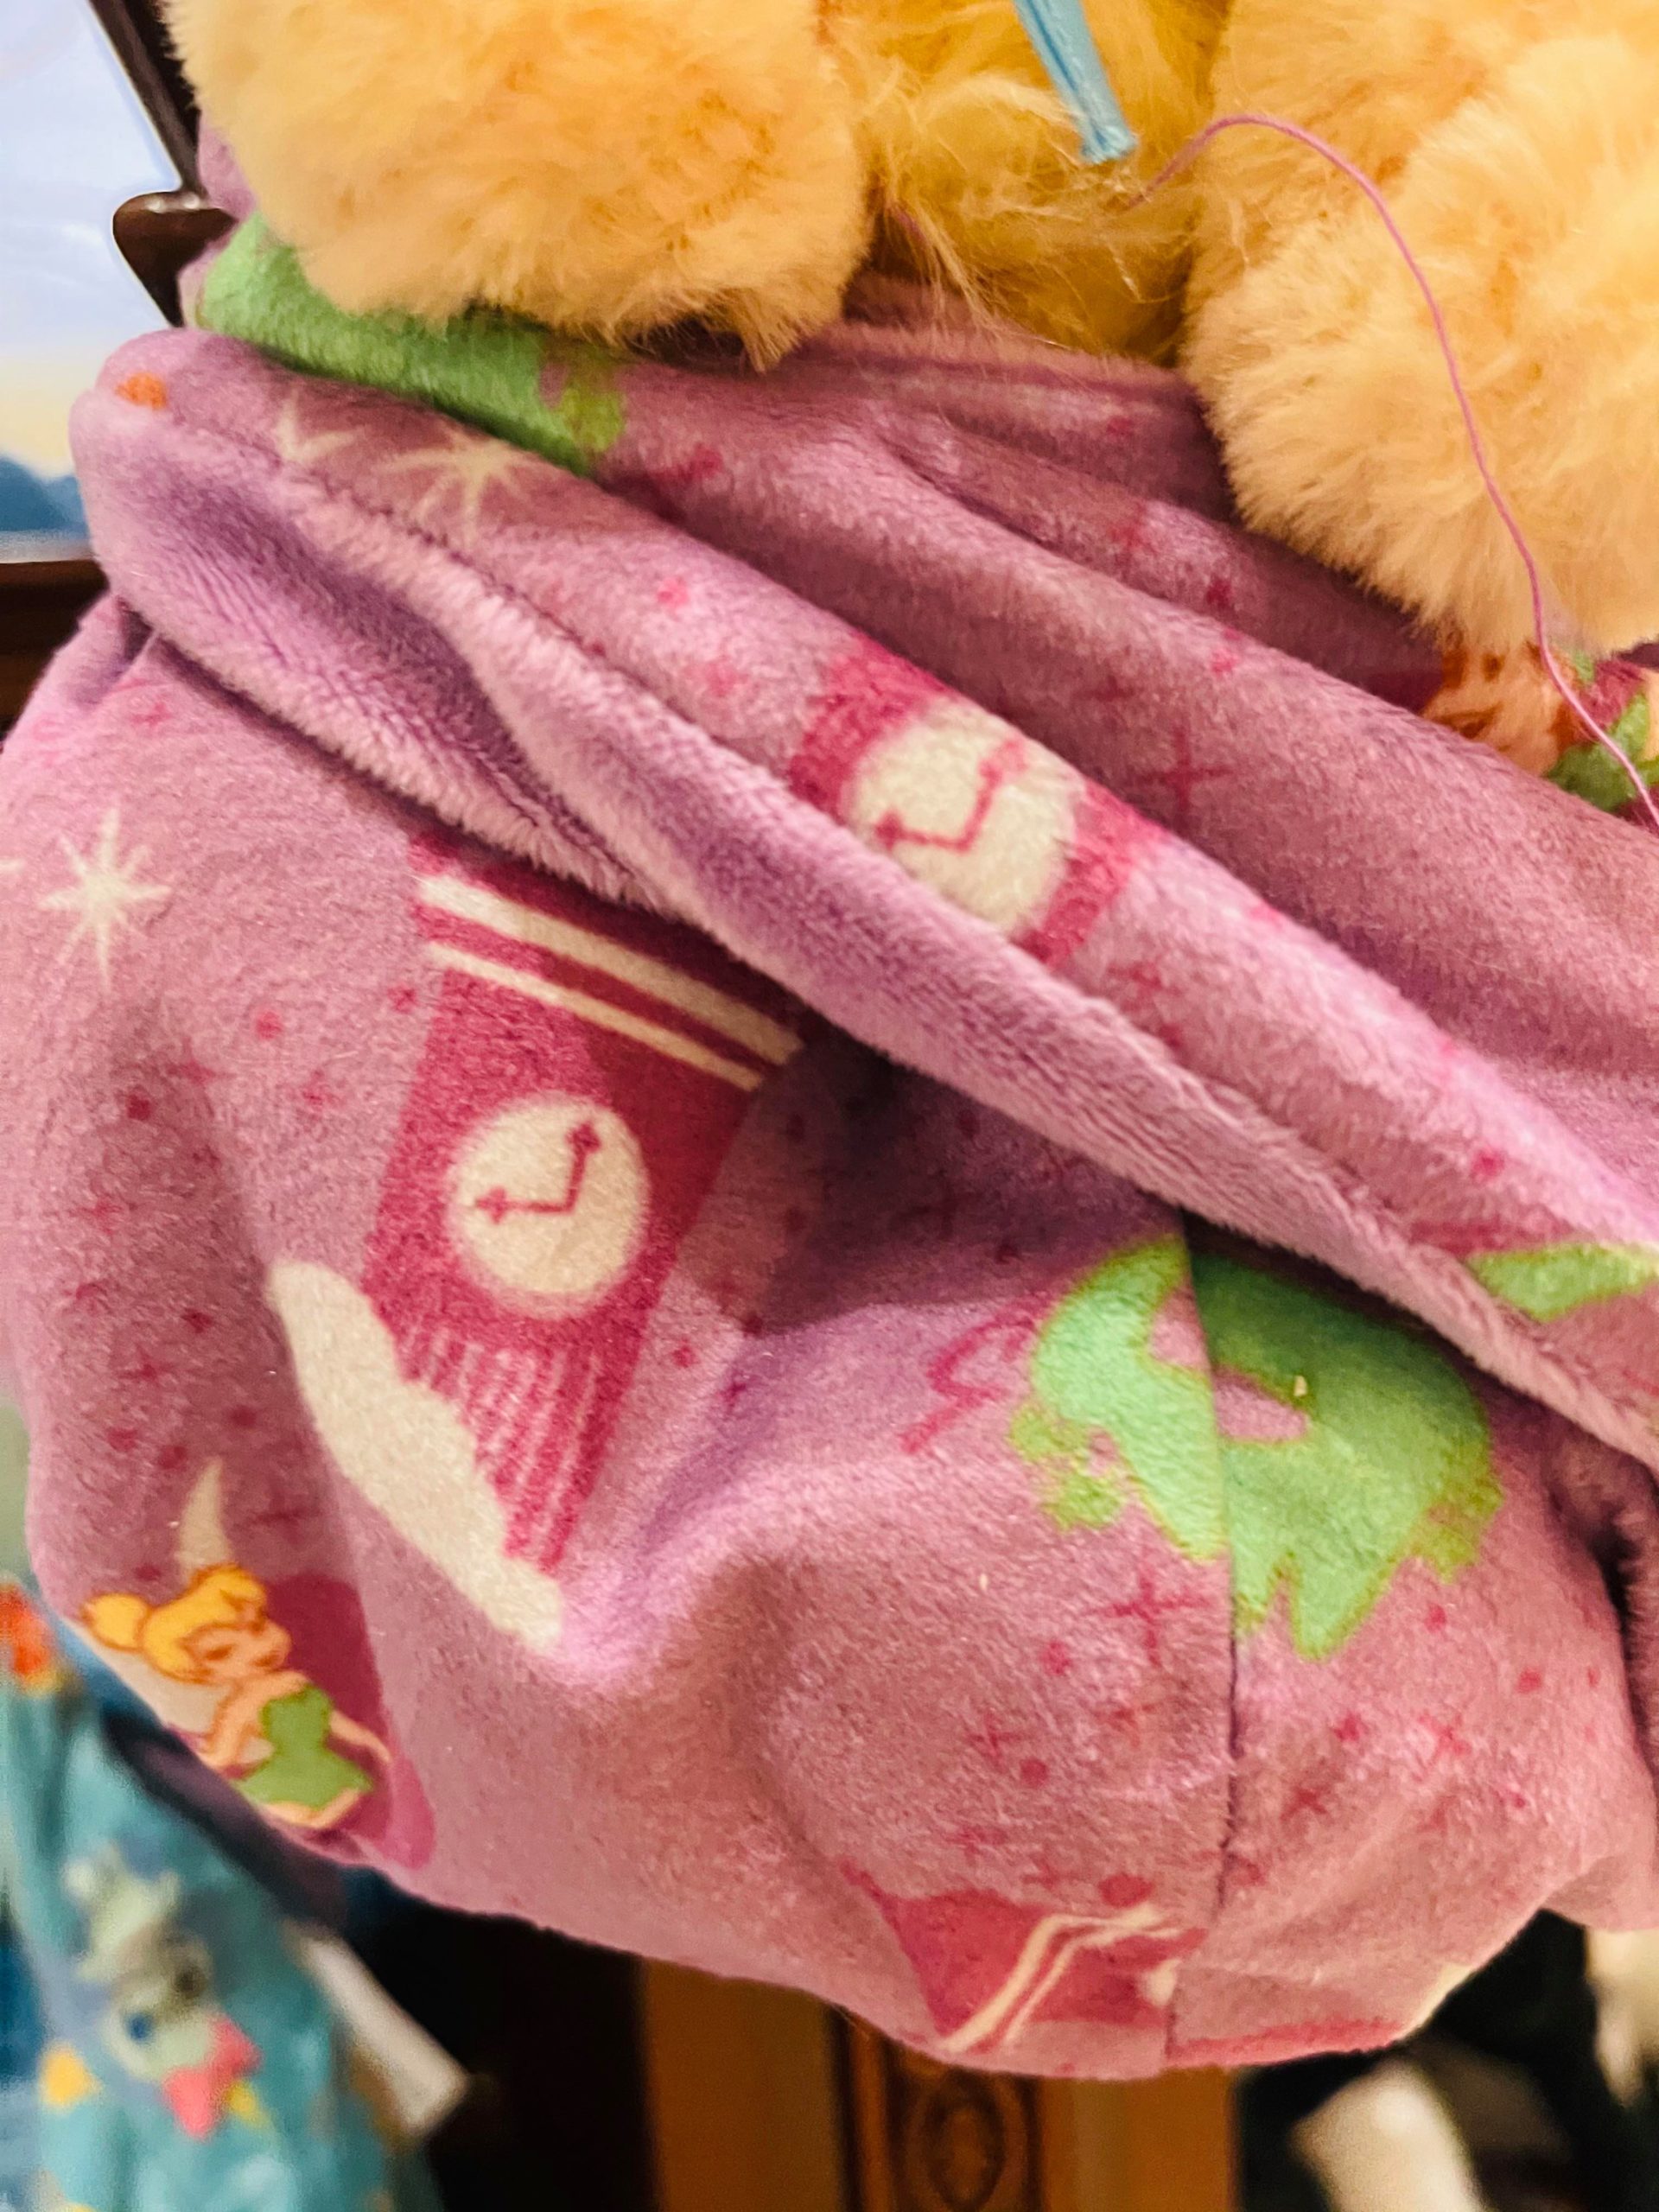 FINALLY! Nana from Peter Pan Gets Her Own Plush - MickeyBlog.com